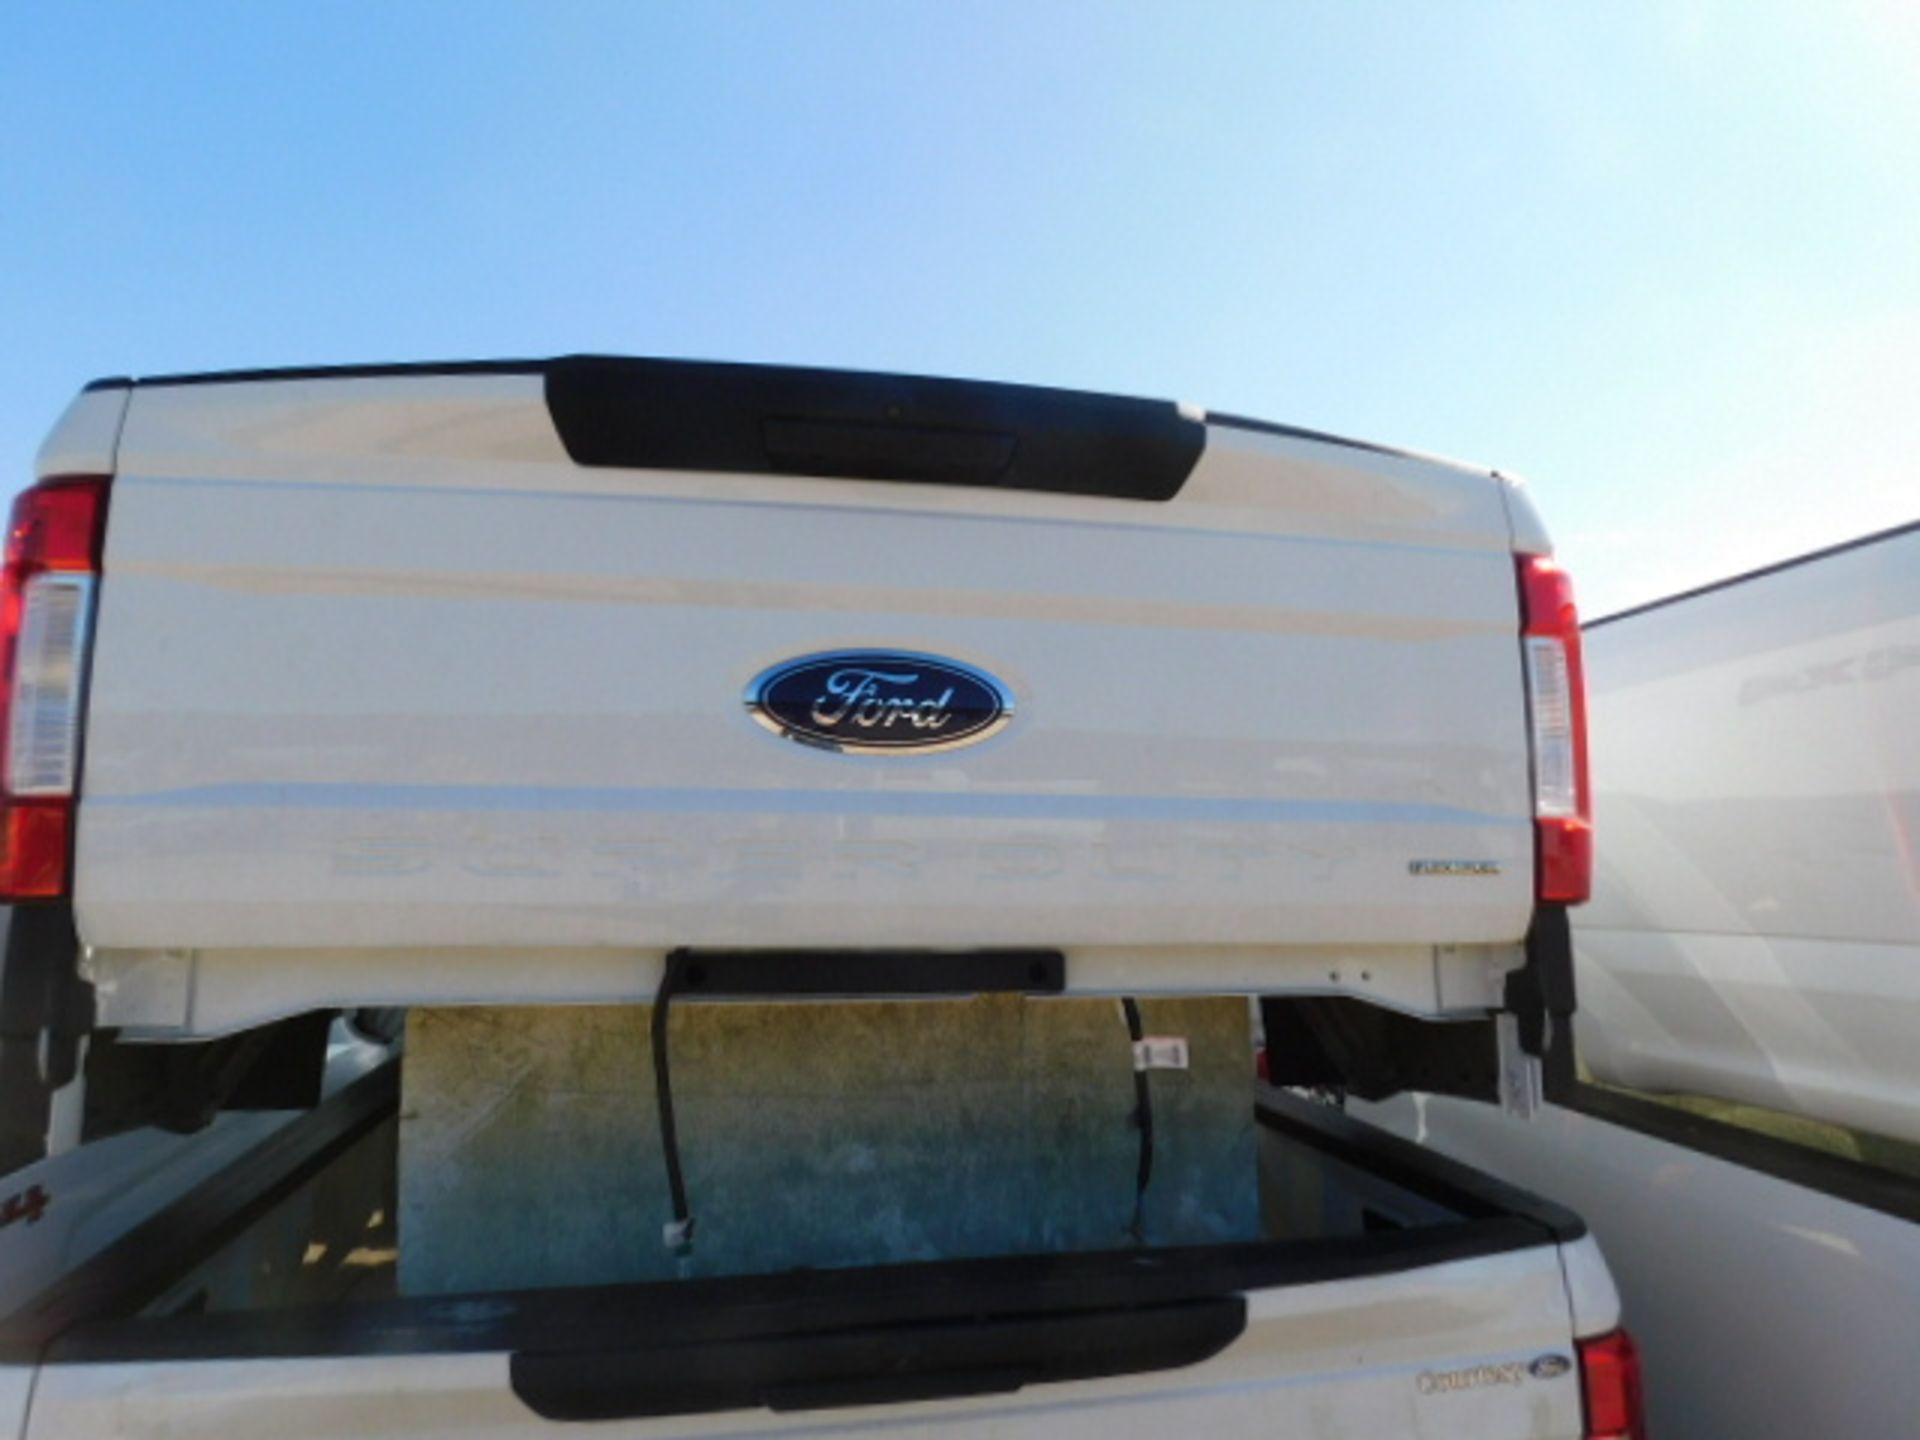 FORD TRUCK BED FX 4 OFF ROAD - Image 2 of 2